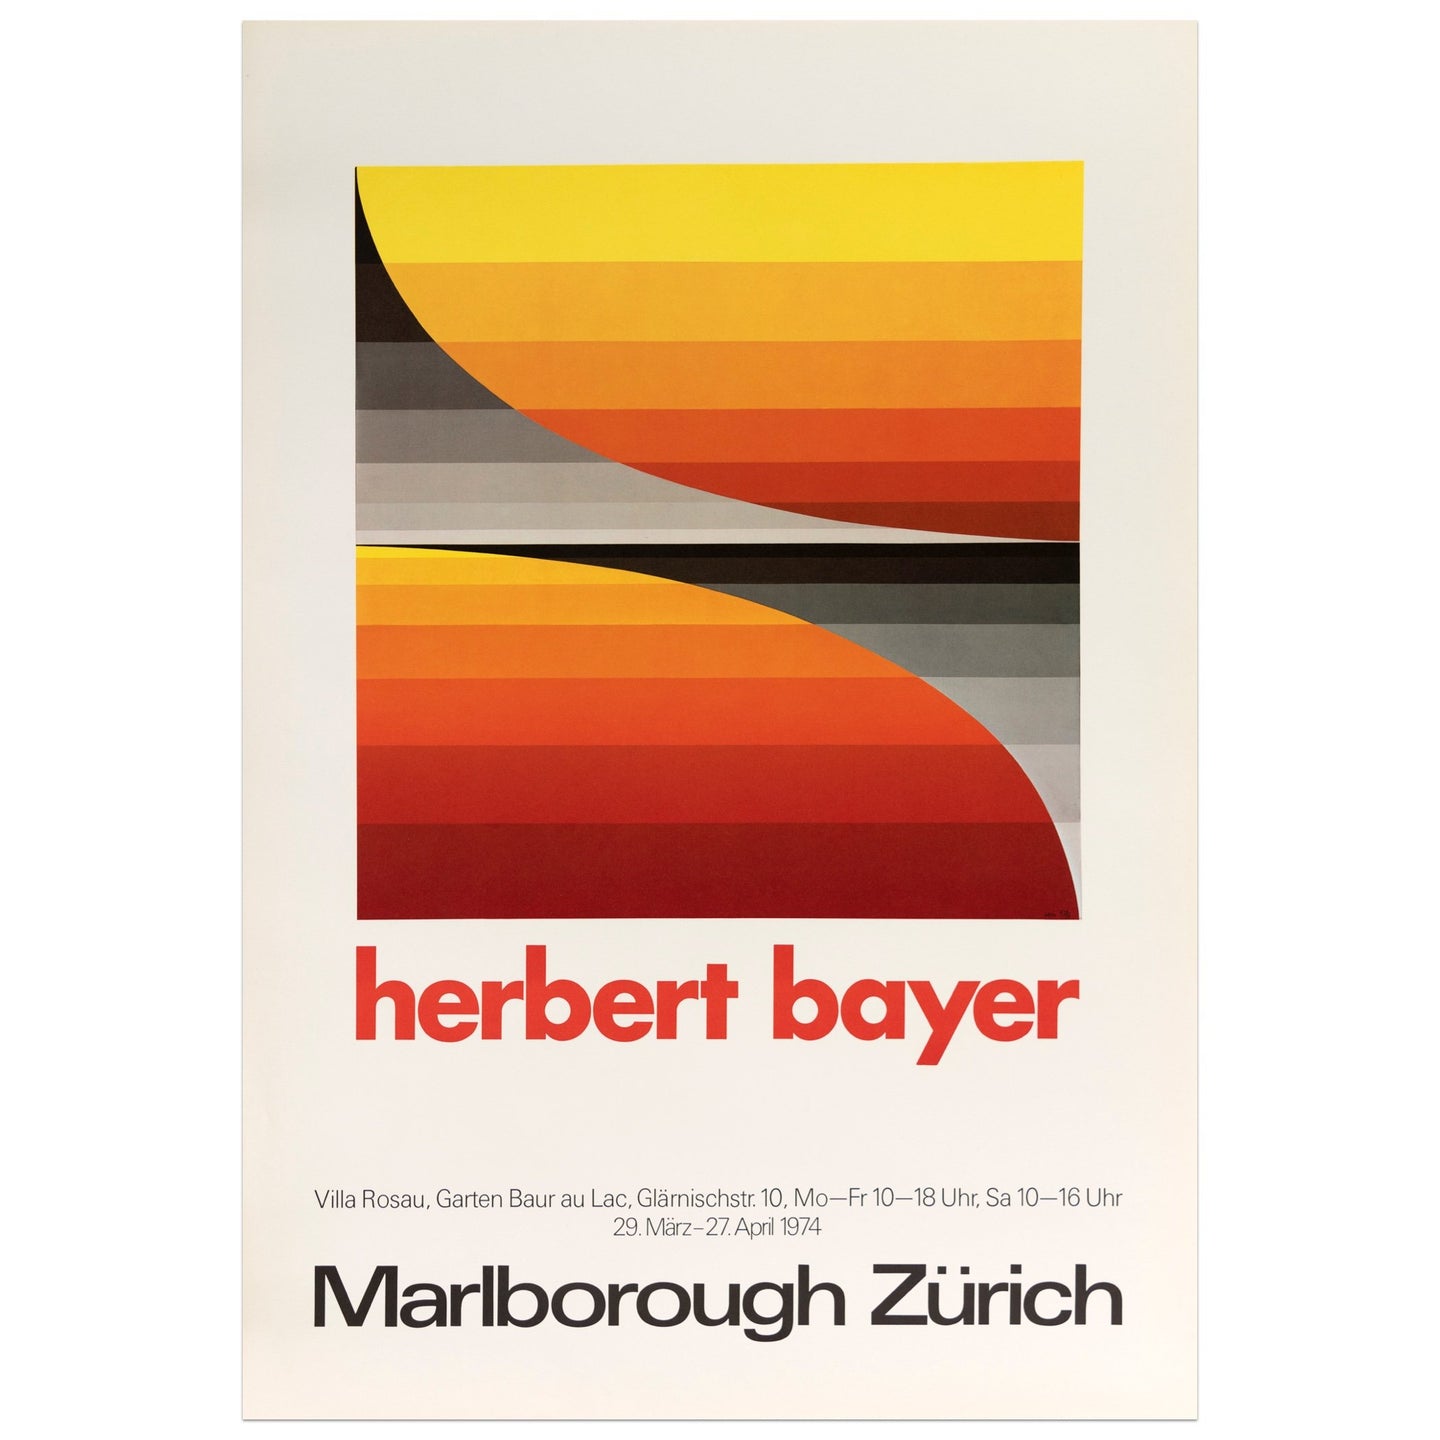 1974 Marlborough Zürich Herbert Bayer poster featuring a red to yellow and black to gray gradient